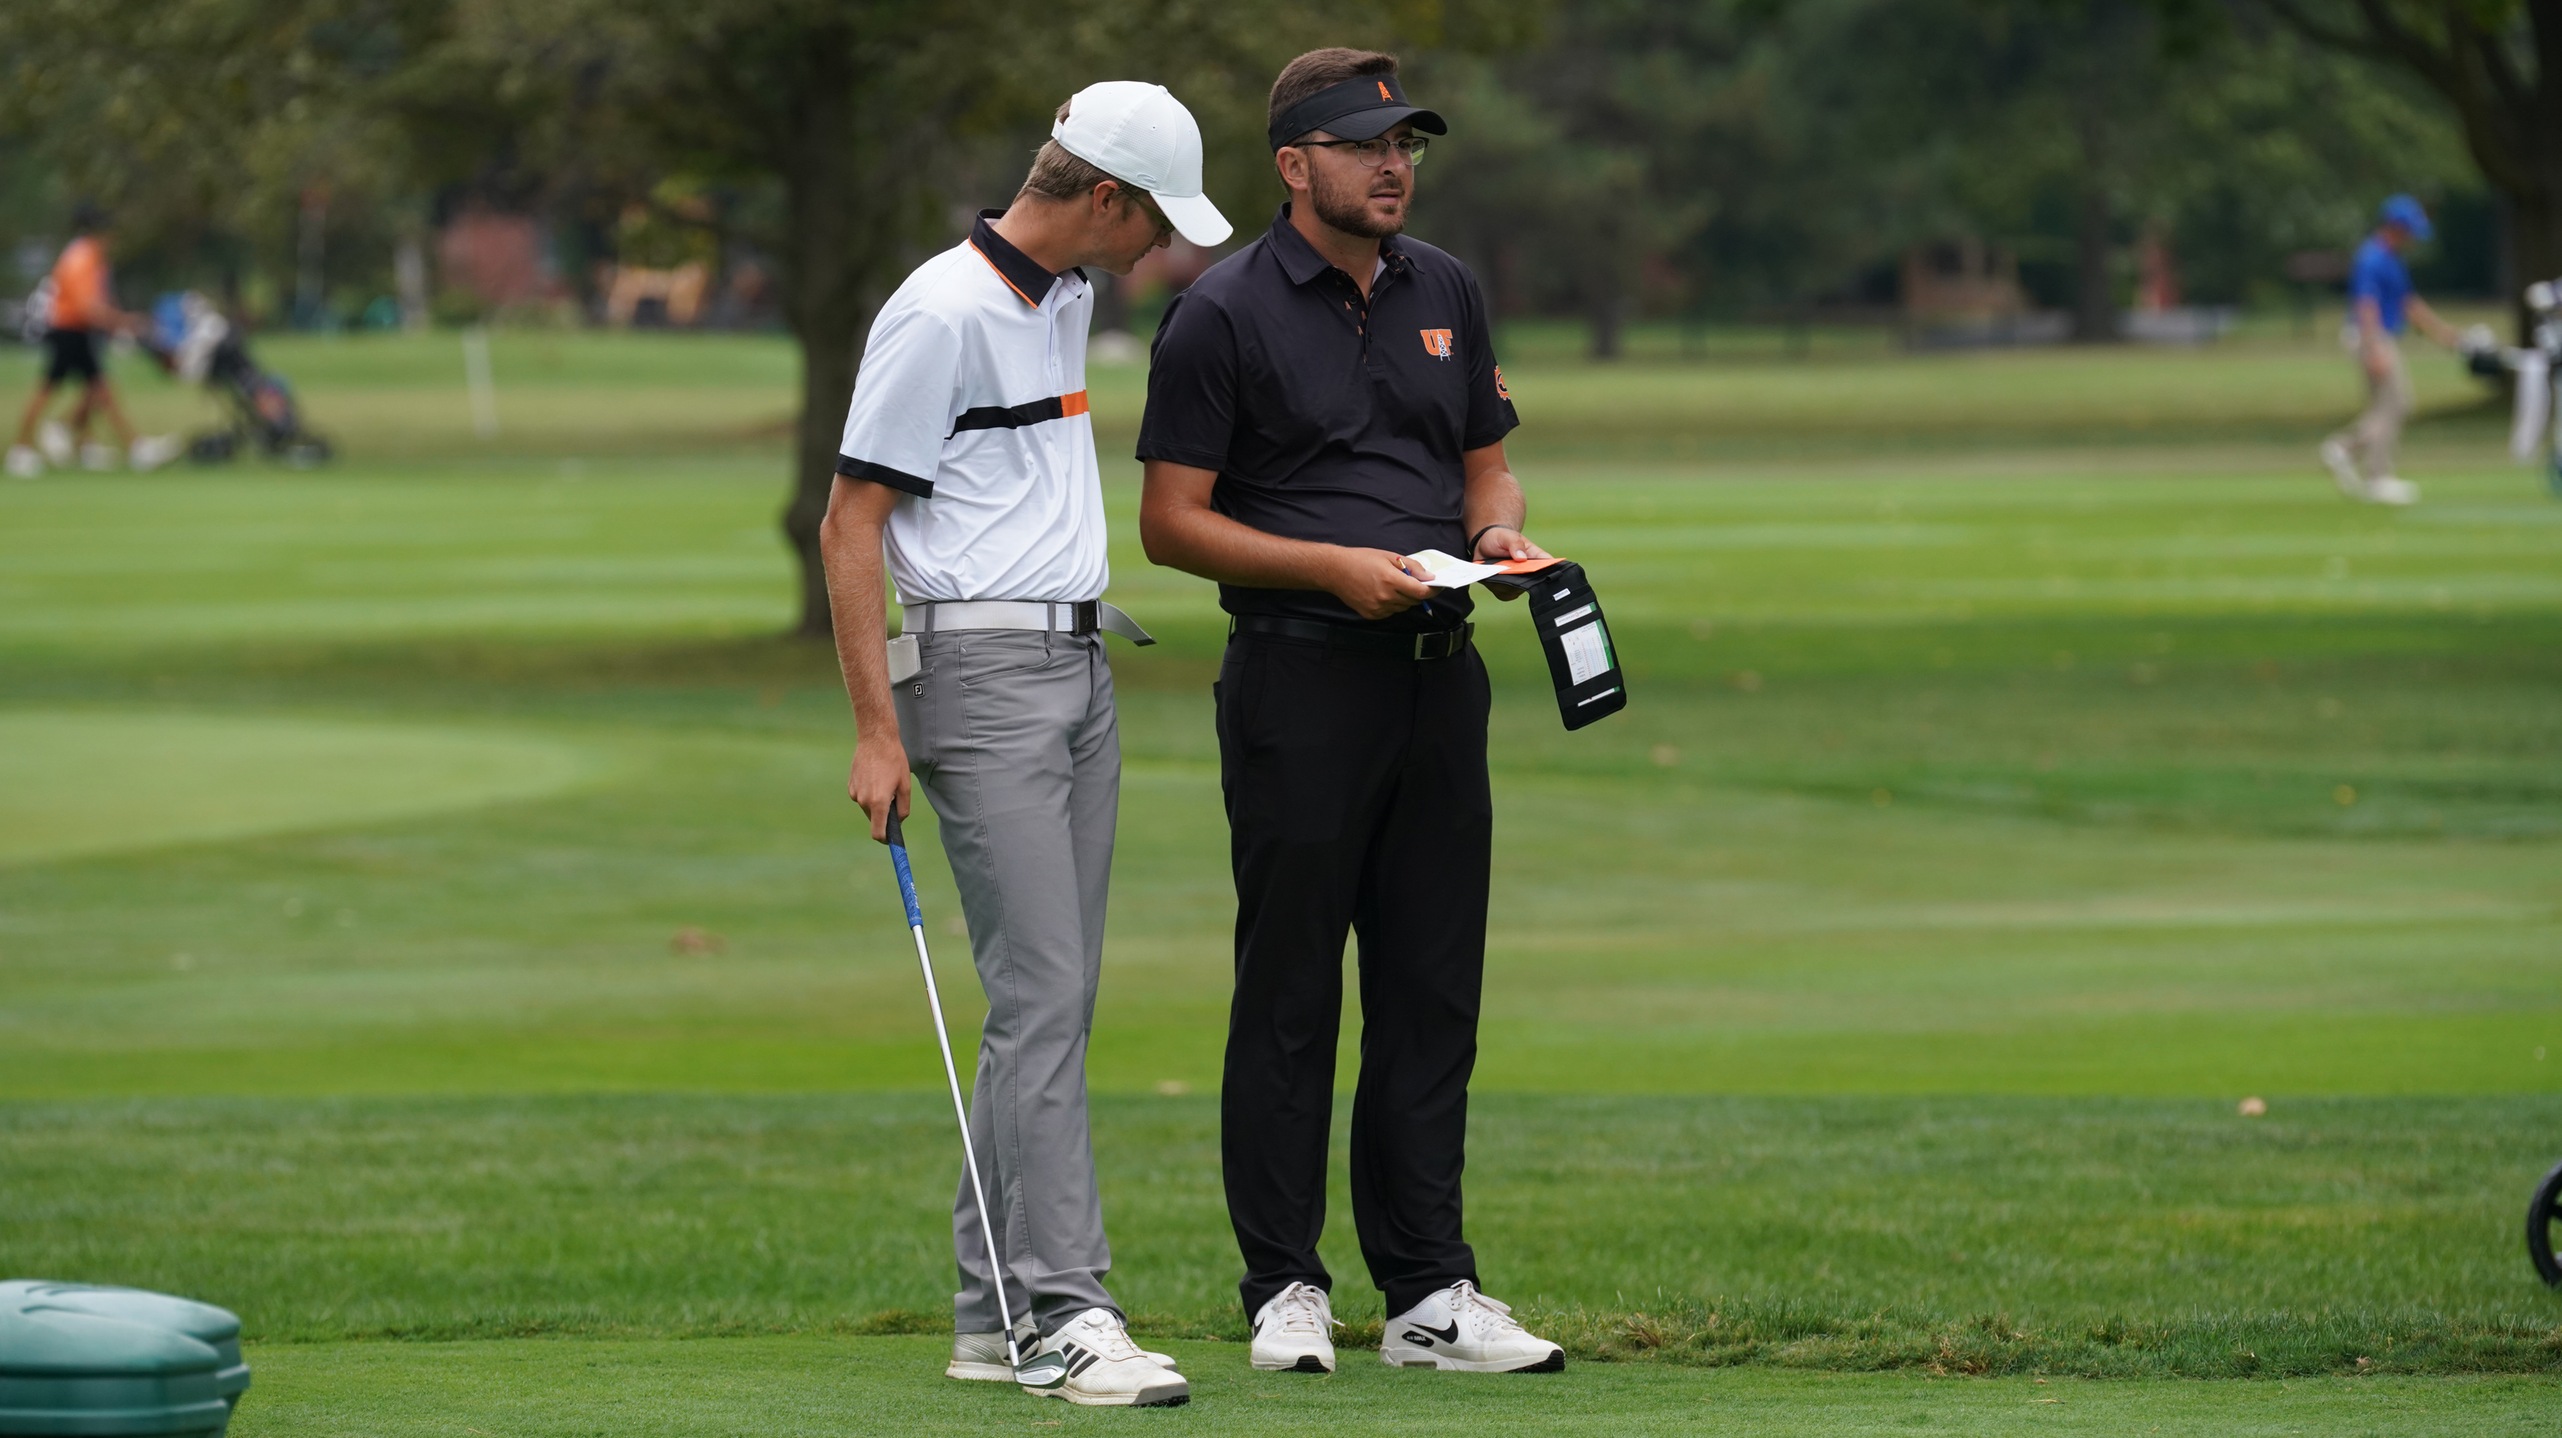 Coach and player look at yardage book on tee. 